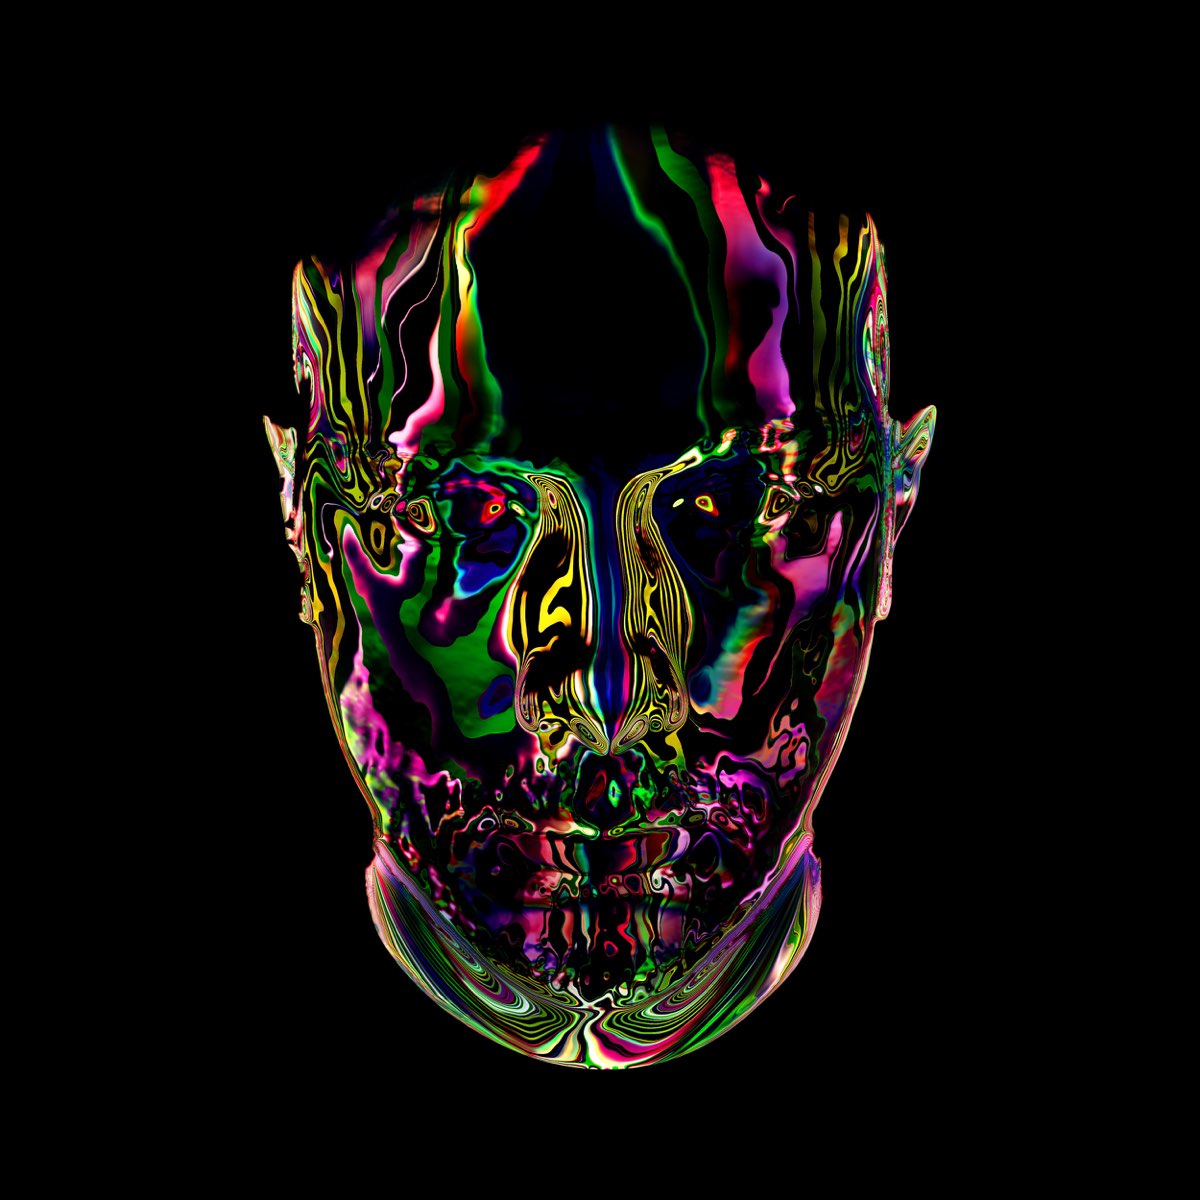 Opus by Eric Prydz on Apple Music